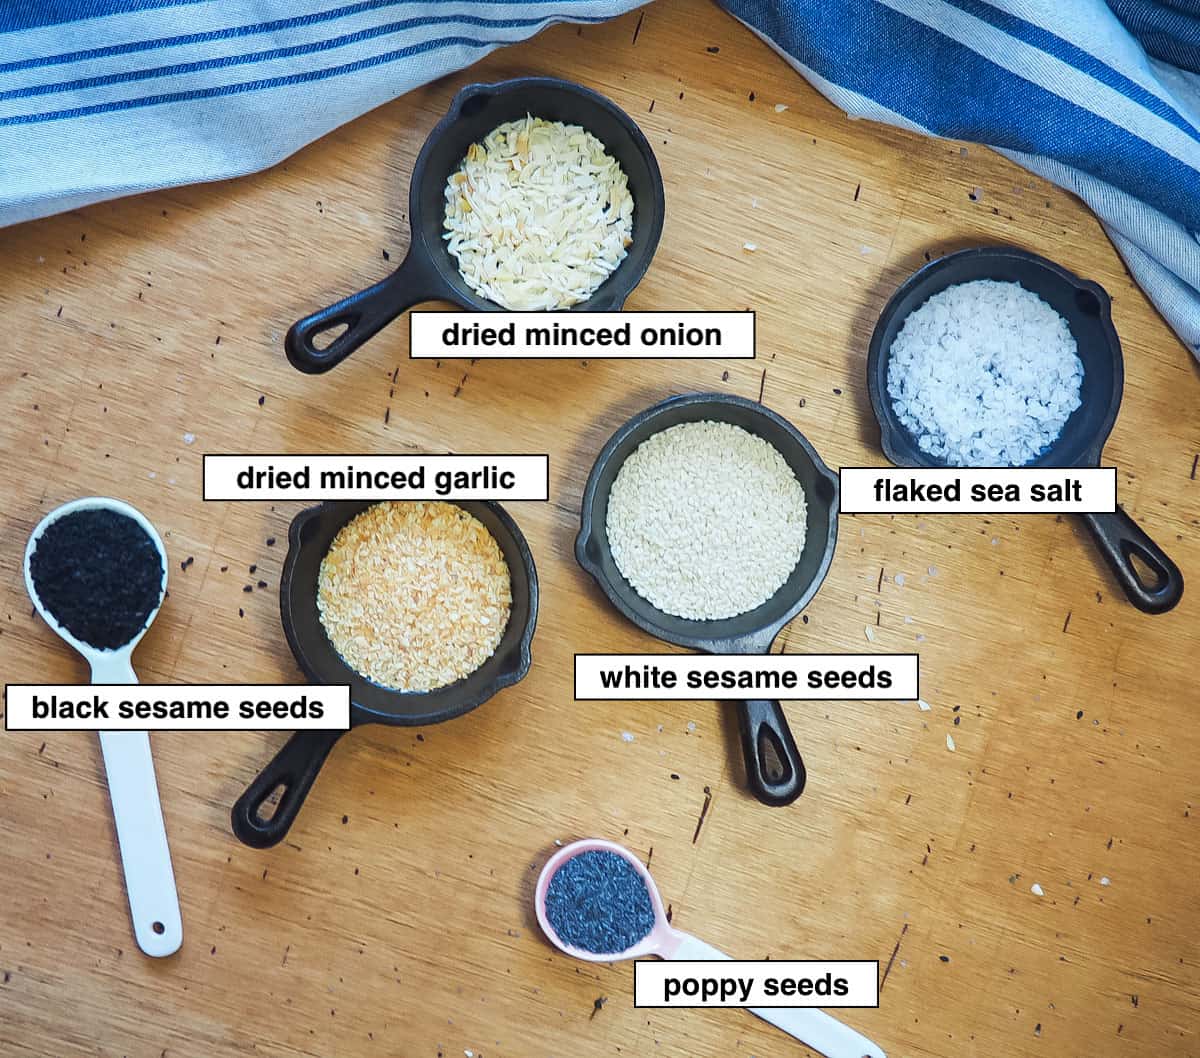 The ingredients in everything bagel seasoning laid out in small bowls and spoons and labeled.